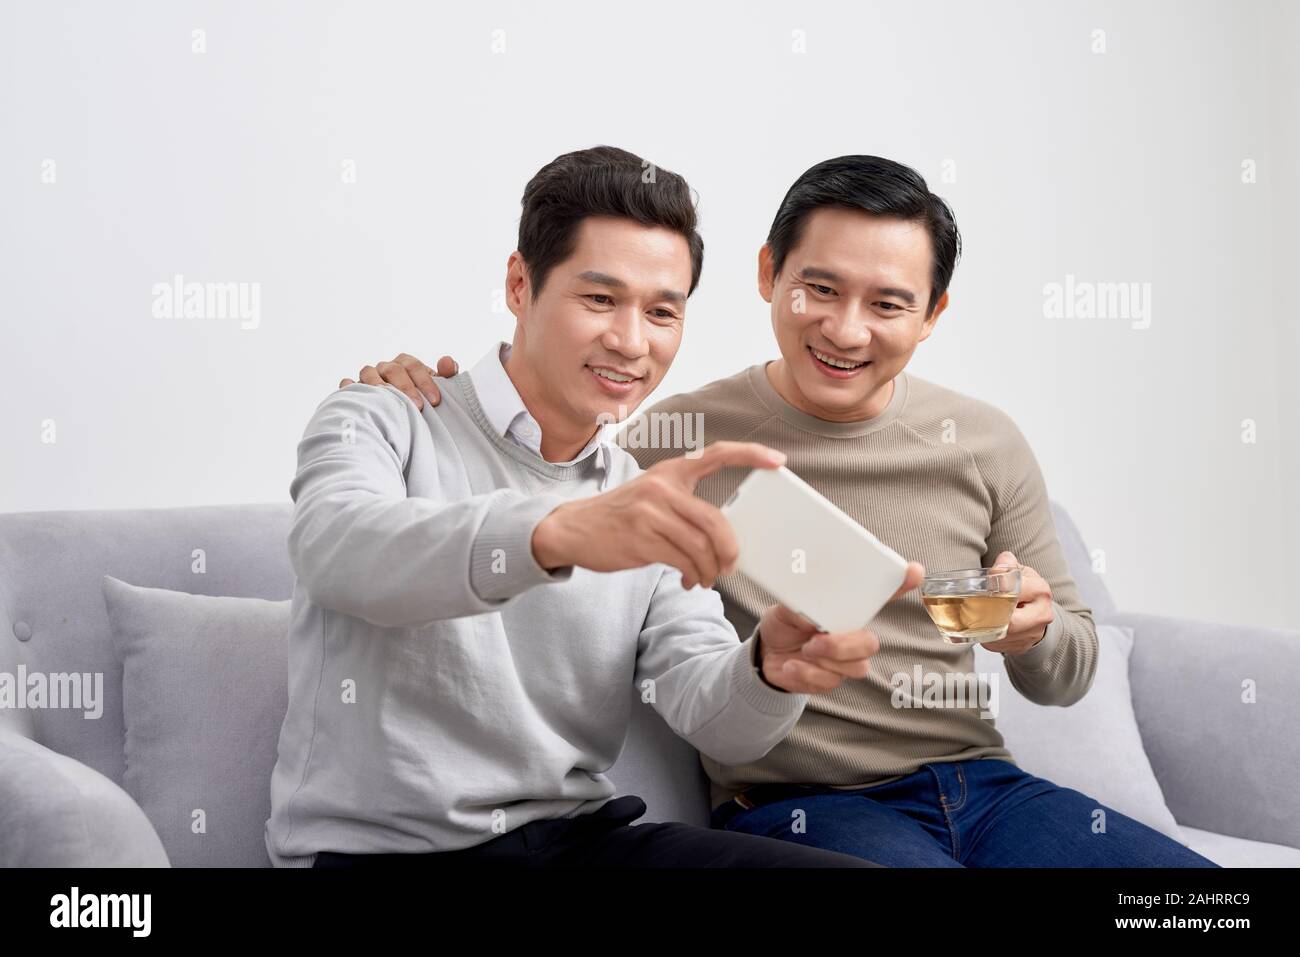 Cheerful young men dressed in casual wear smiling at camera while making selfie photo on front camera Stock Photo